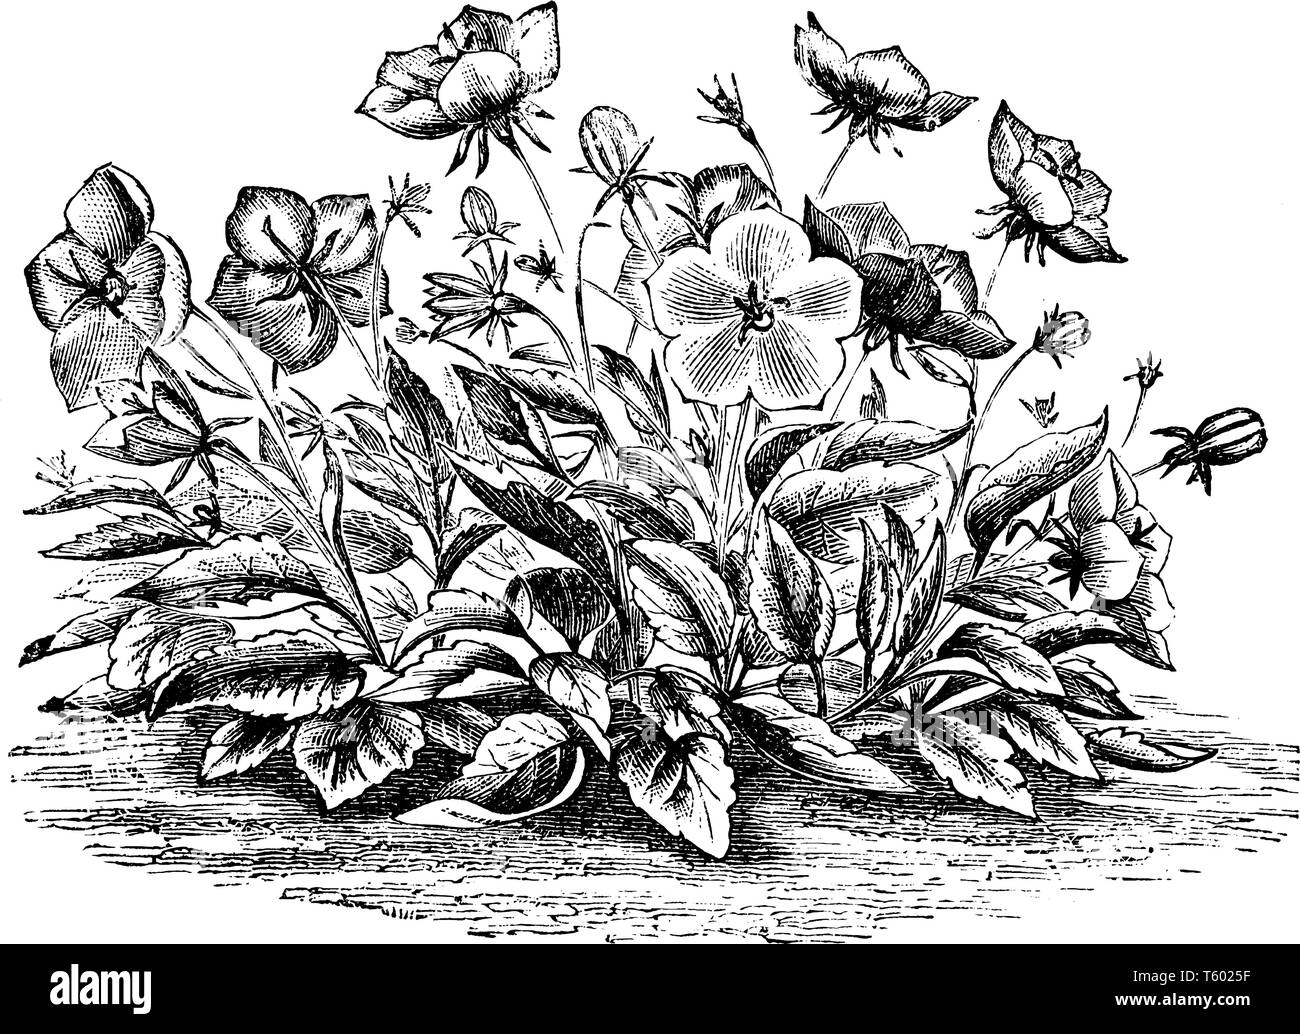 This is a image of flowers of Campanula Carpathica Pelviformis. Its flowers are fragrant and lilac colored, vintage line drawing or engraving illustra Stock Vector